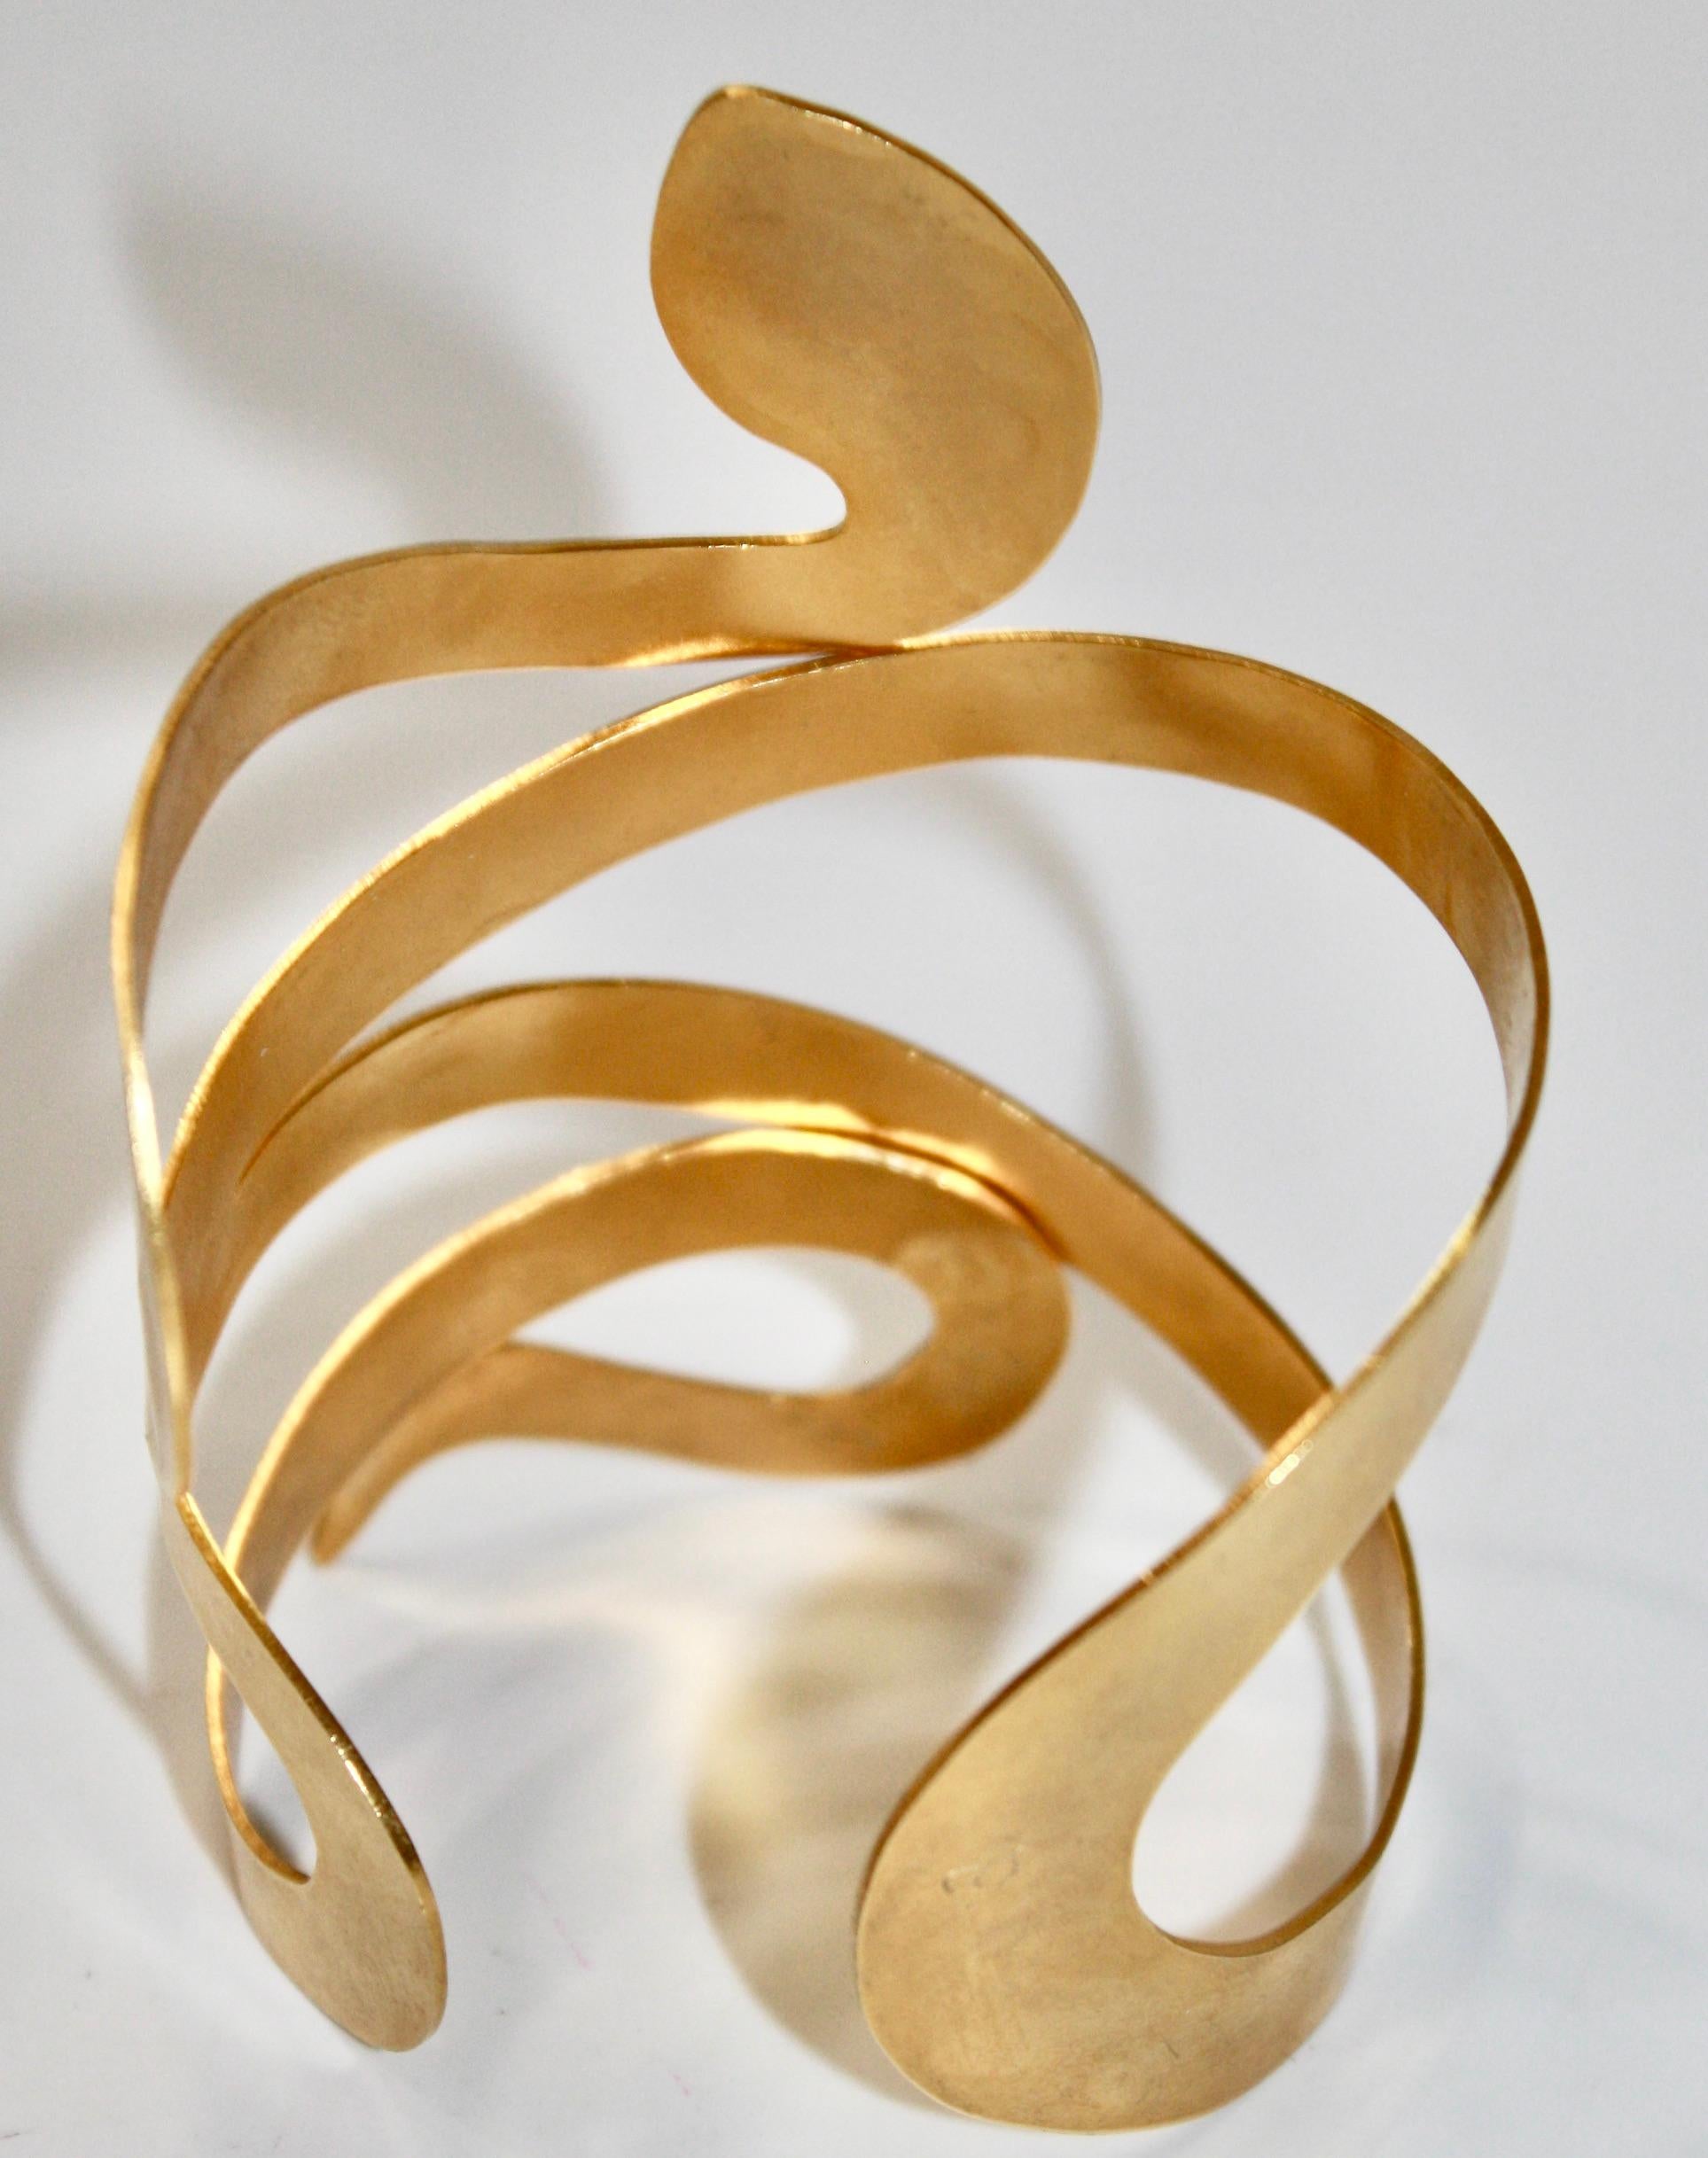 Nada Zeineh creates her designs and executes jewelry in various materials like terracotta gilded with gold leaf, or threads and plates of brass weaved, twisted, hammered and dipped in gold. Her work is inspired by abstract geometric forms inherent